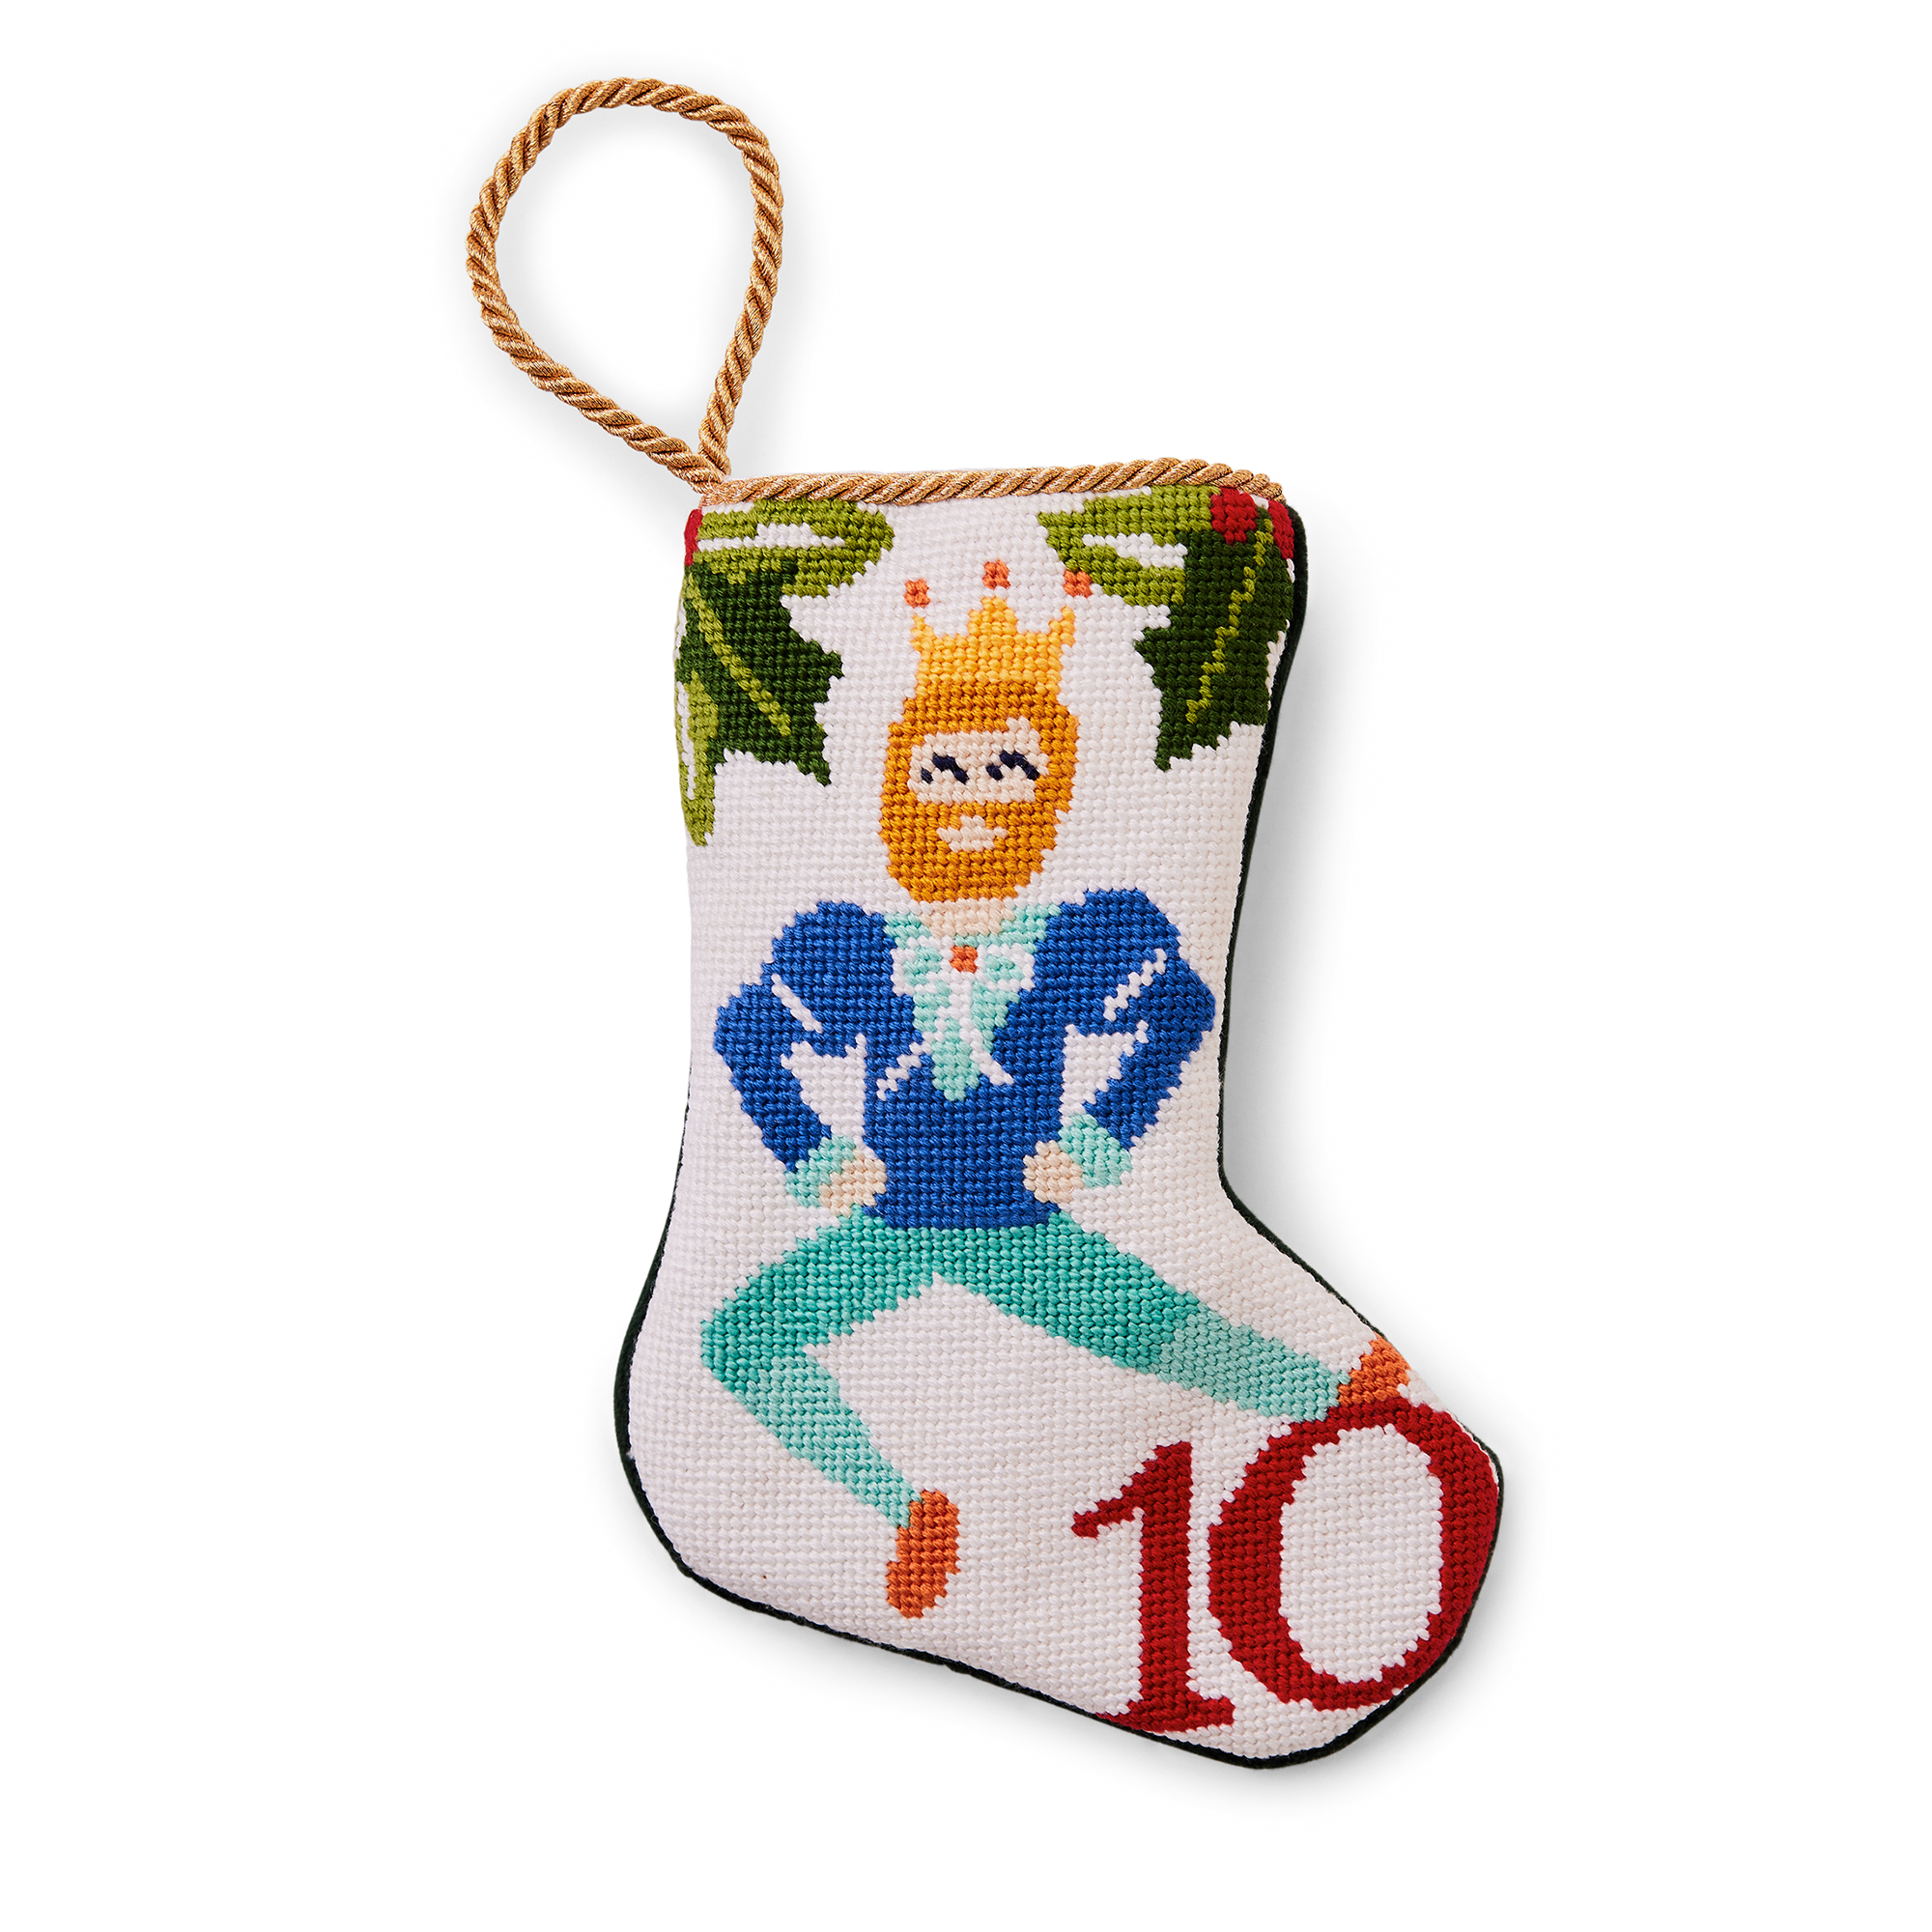 An intricately designed mini needlepoint stocking featuring the '10 Lords a Leaping' from the classic Christmas carol. This festive decoration adds a traditional and charming touch to your holiday decor. Perfect as tree ornaments, place settings, or for holding special gifts.